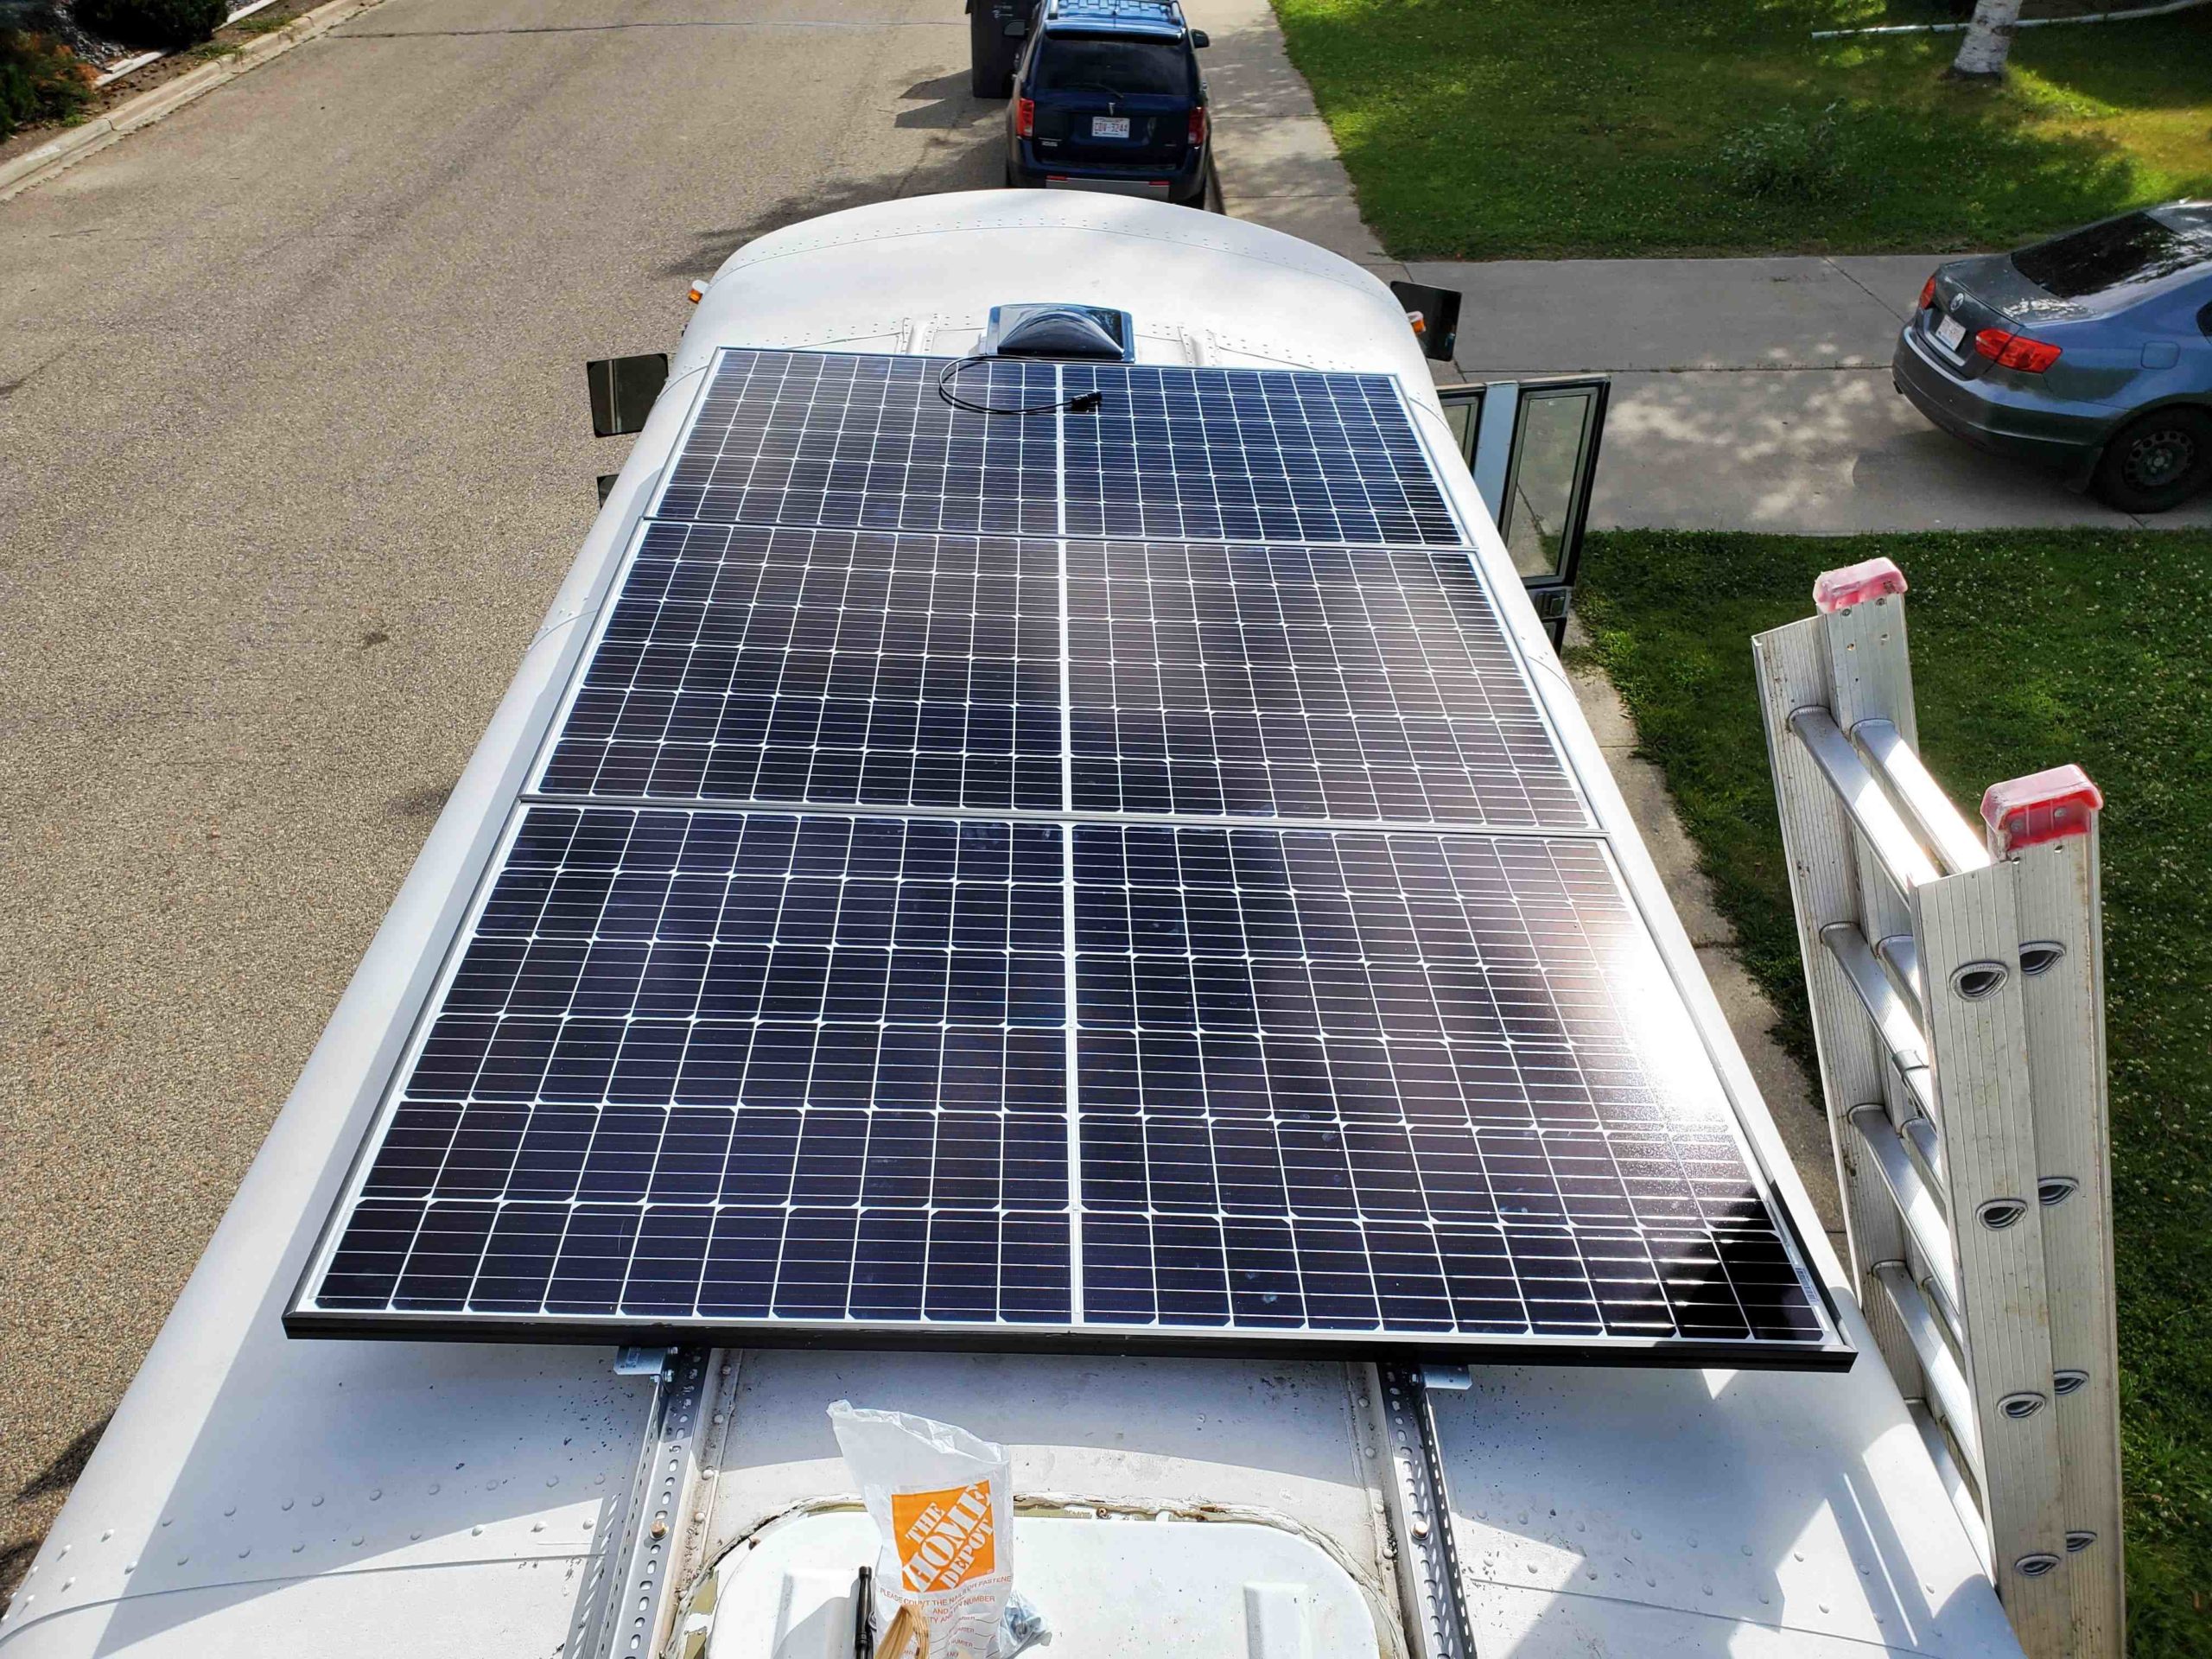 Are solar panels easy to set up?